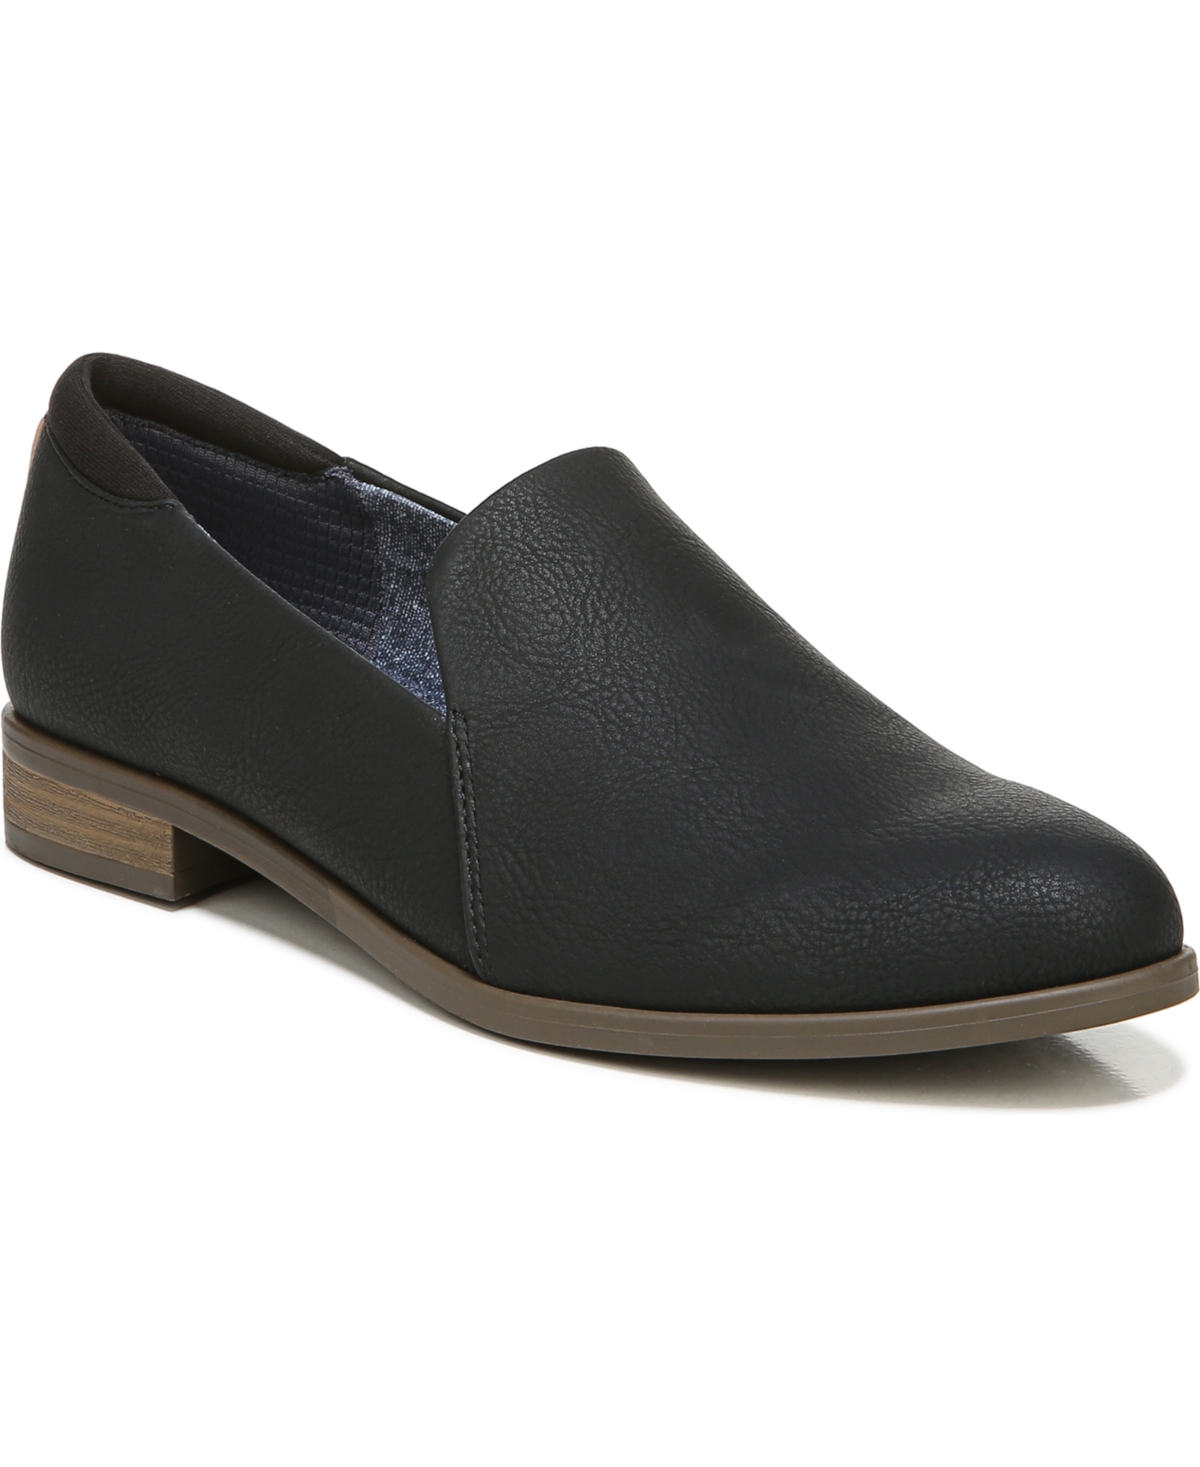 Women's Rate Loafer Slip-ons - Black Faux Leather